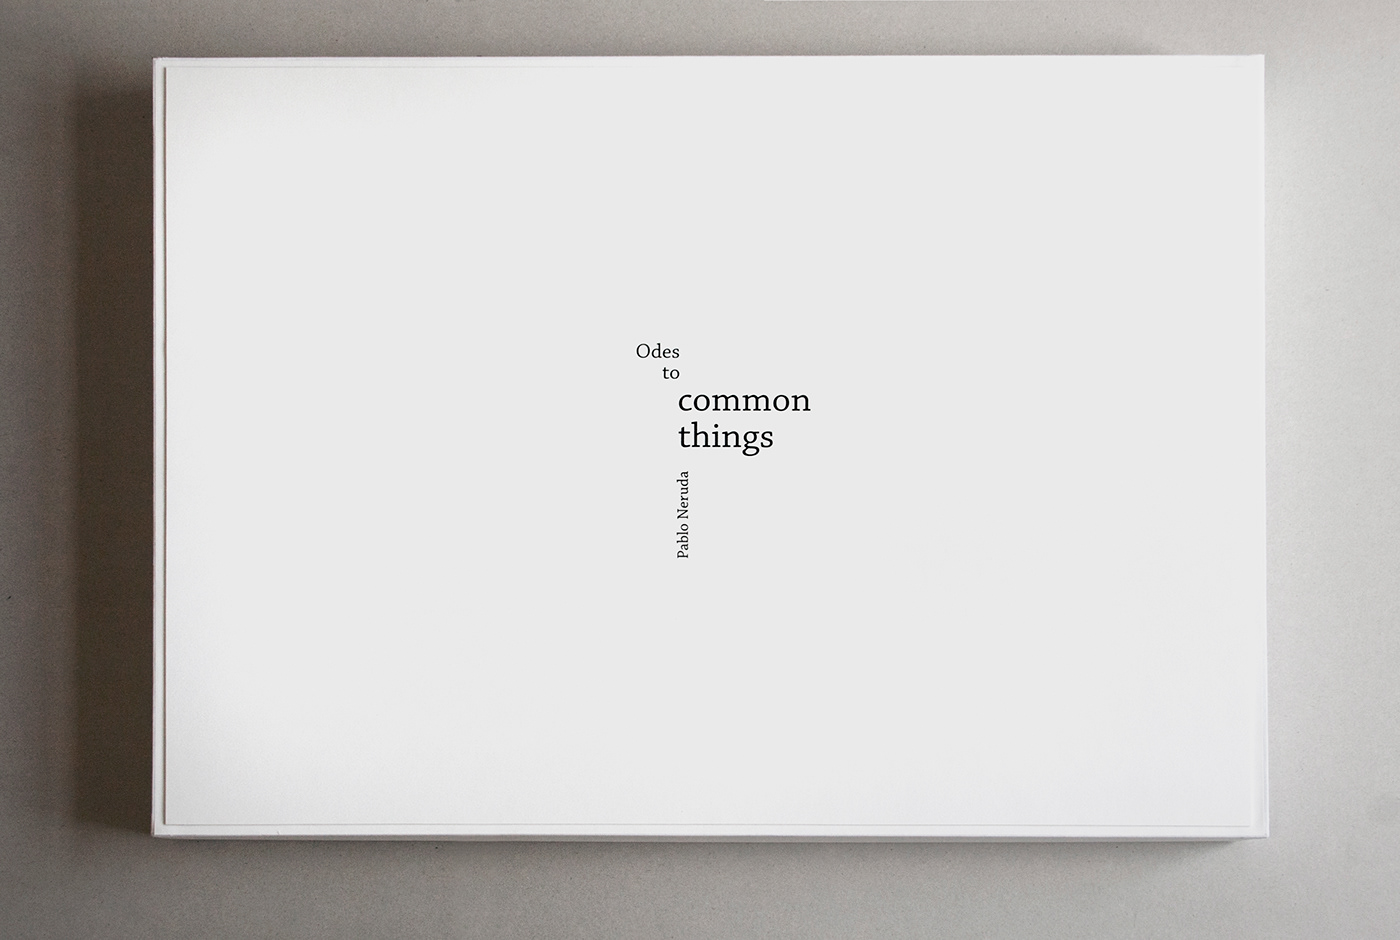 book design artistic book pablo neruda Poetry  Book Series book box book objects things Metamorphosis graphic design 